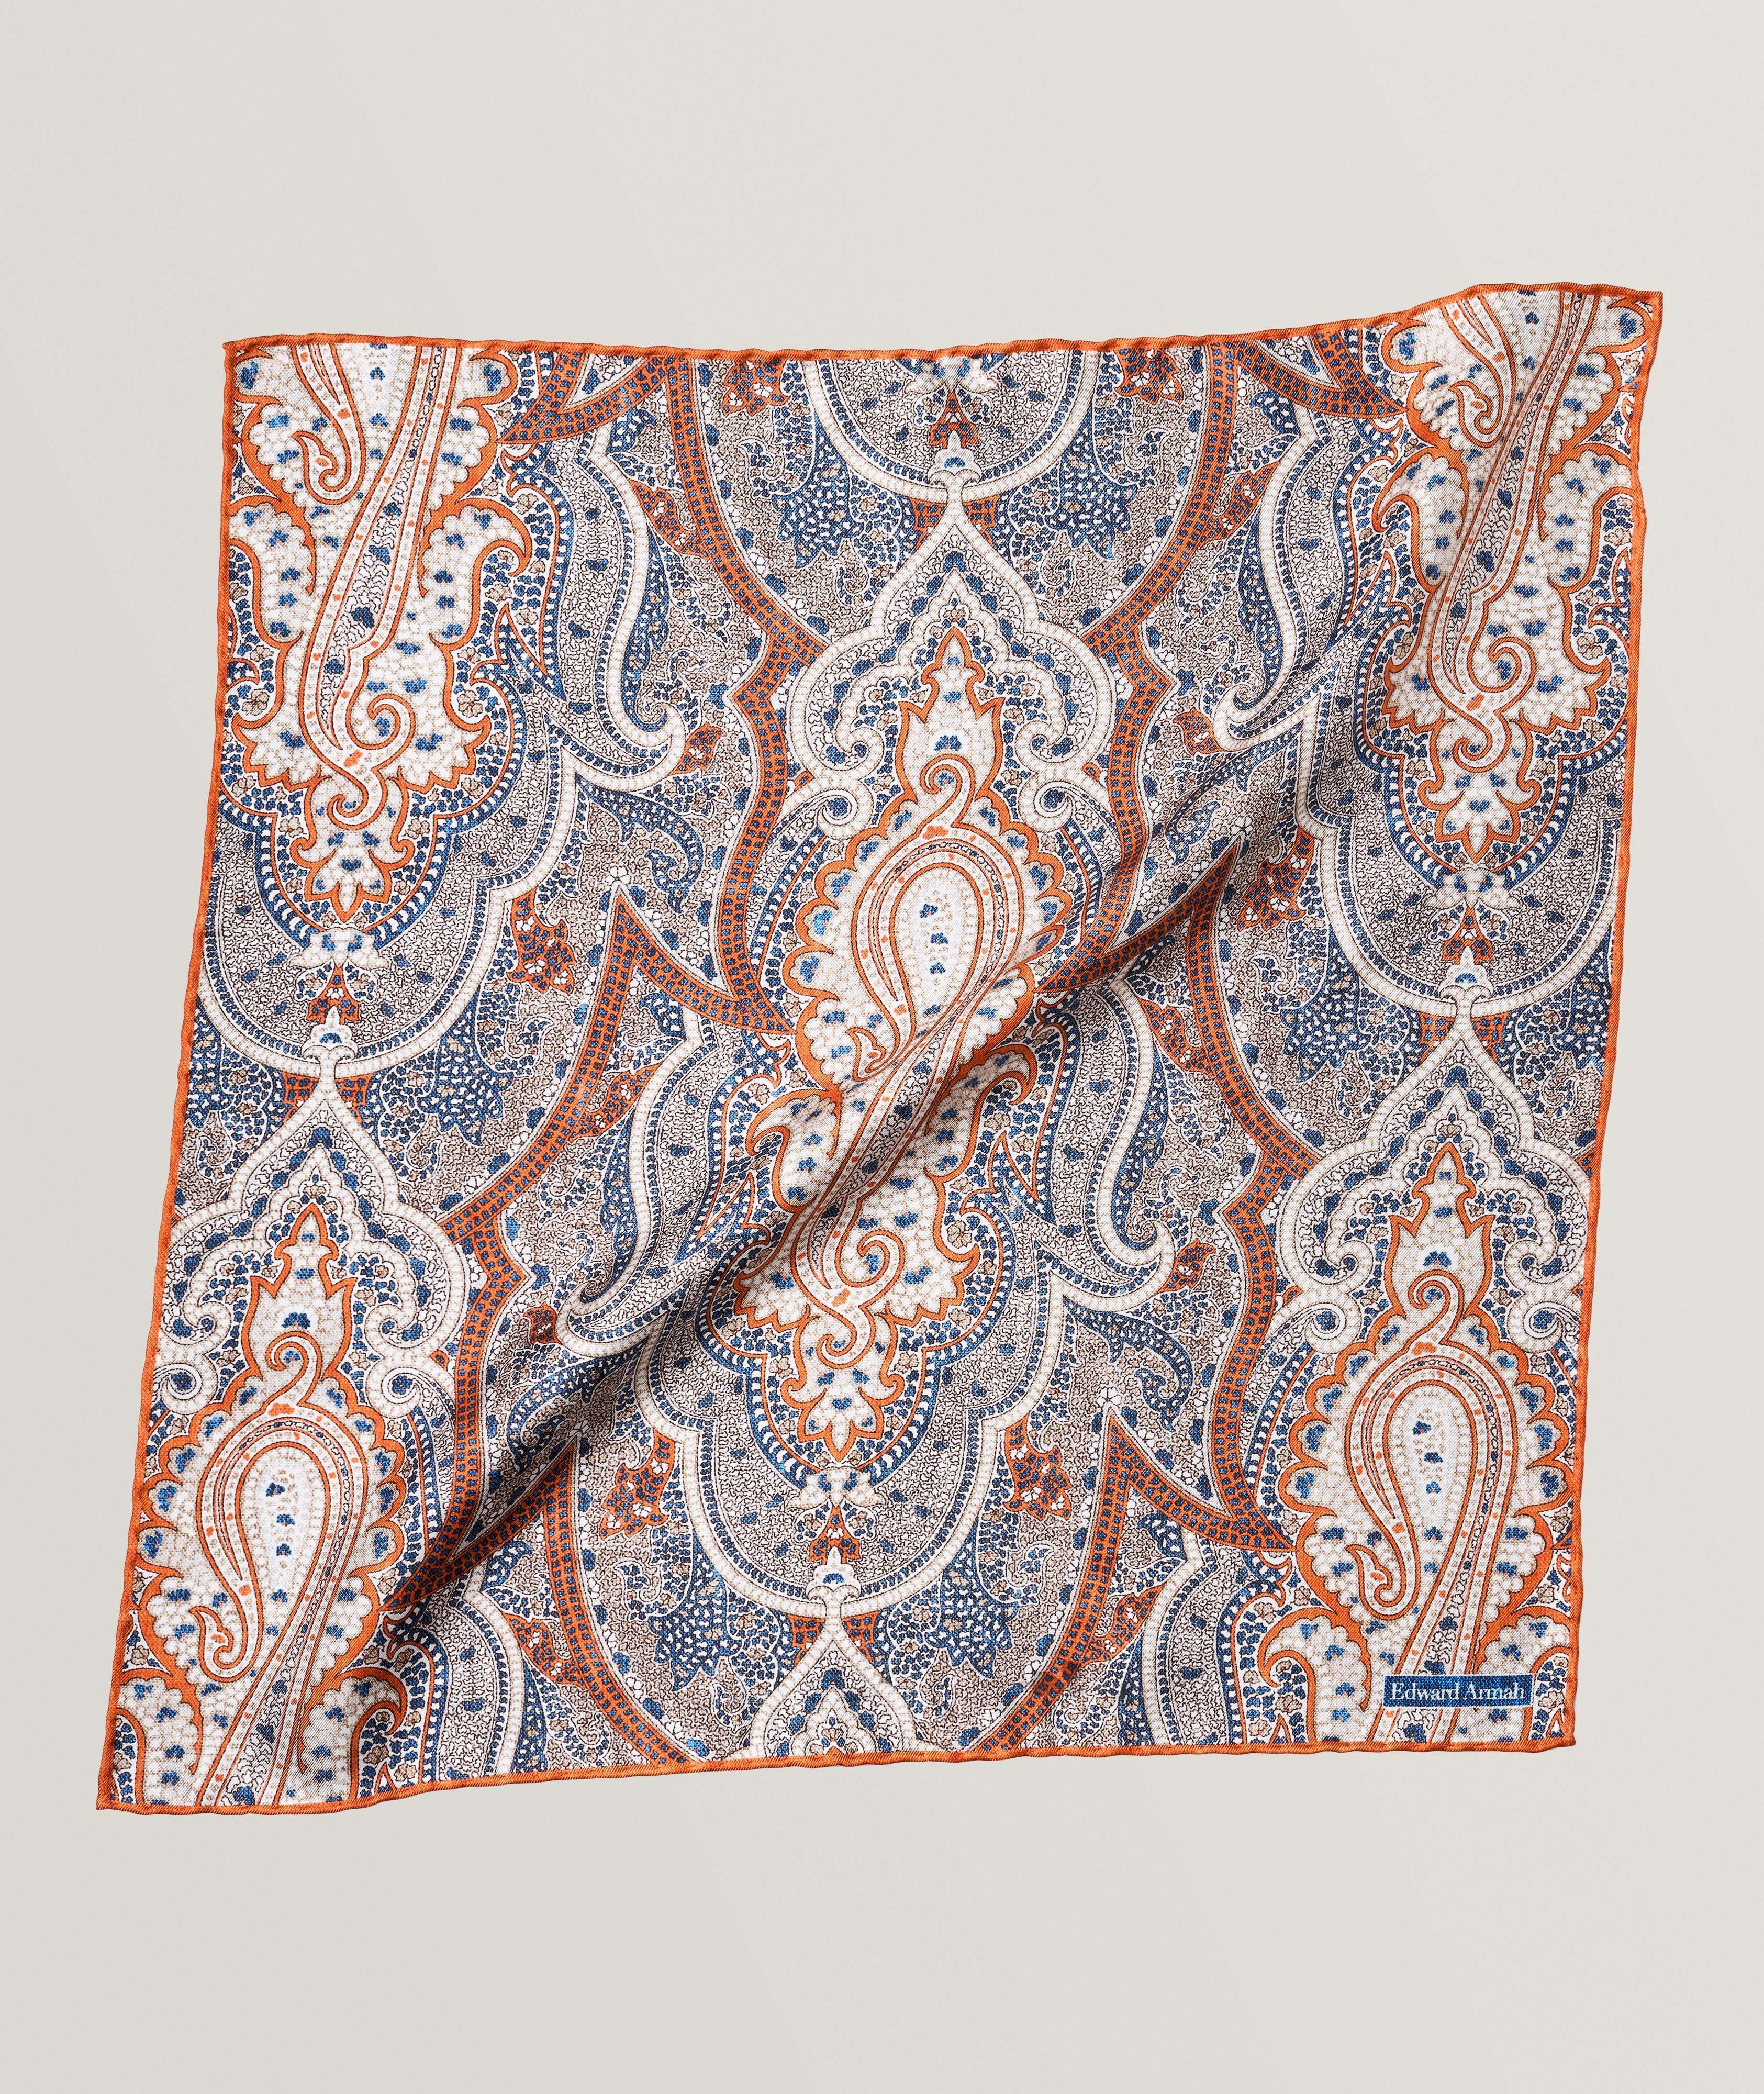 Peggy and Finn Pocket Square - Protea Burgundy - ShopStyle Scarves